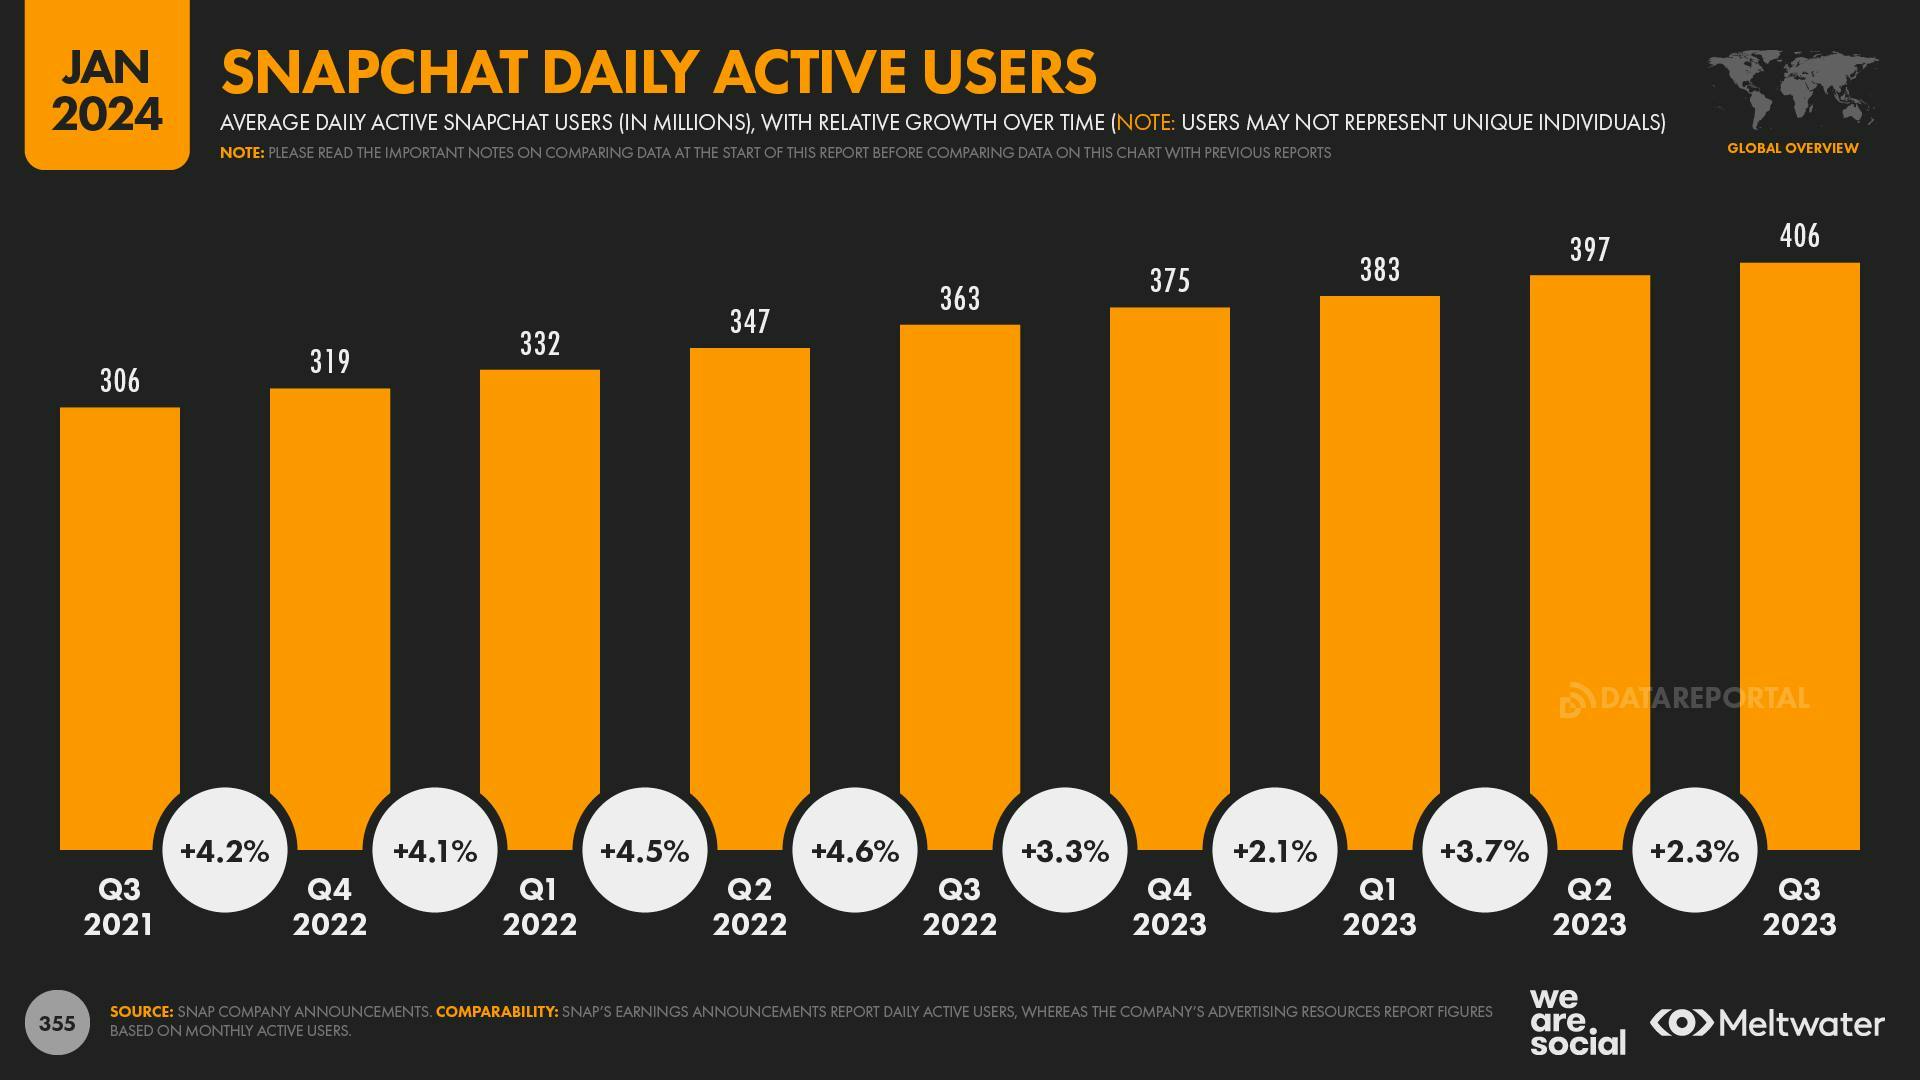 Snapchat daily active users